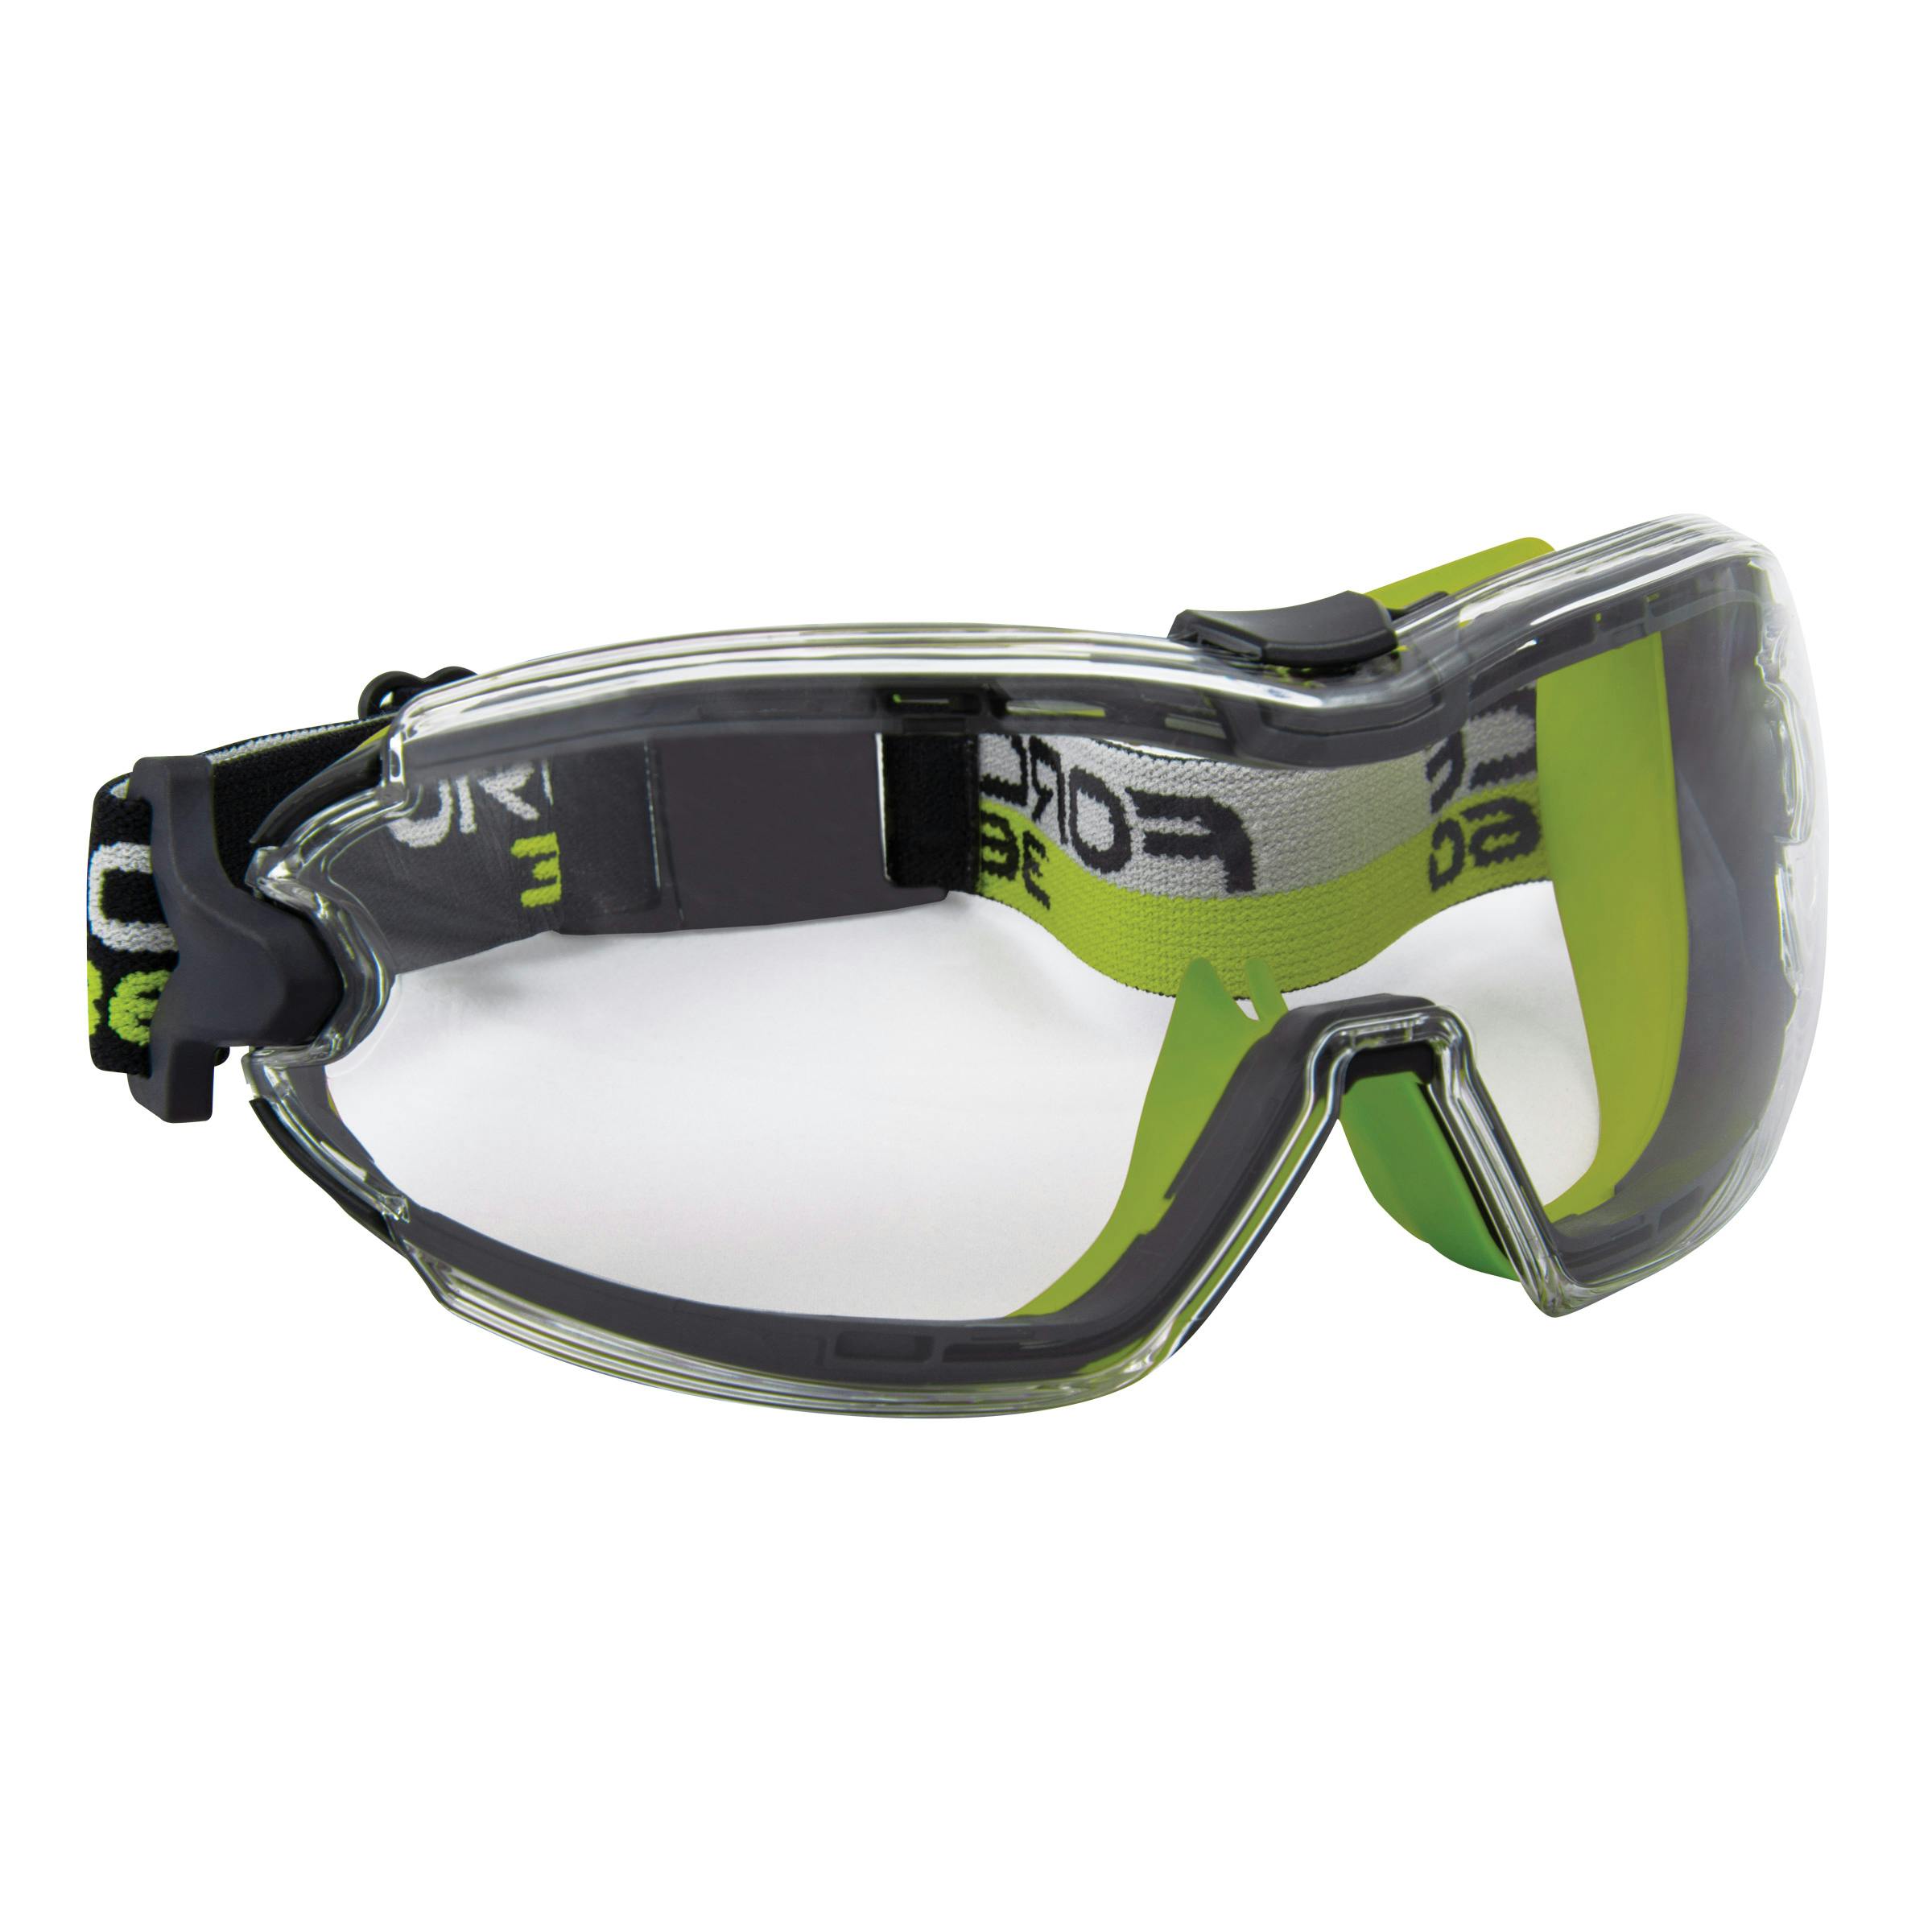 Force360 Multifit Safety Spectacle